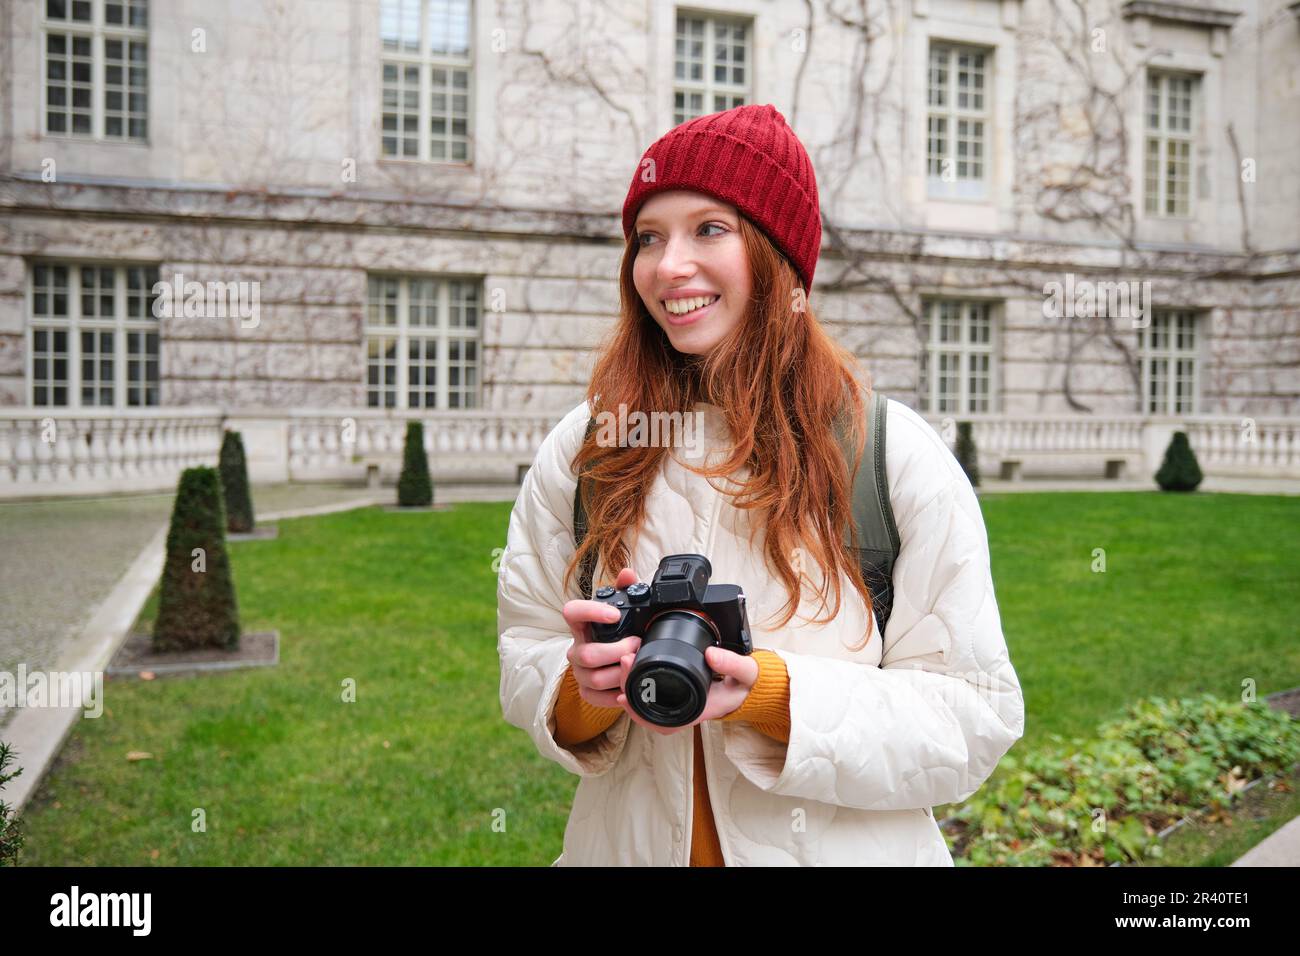 Redhead girl photographer takes photos on professional camera outdoors ...